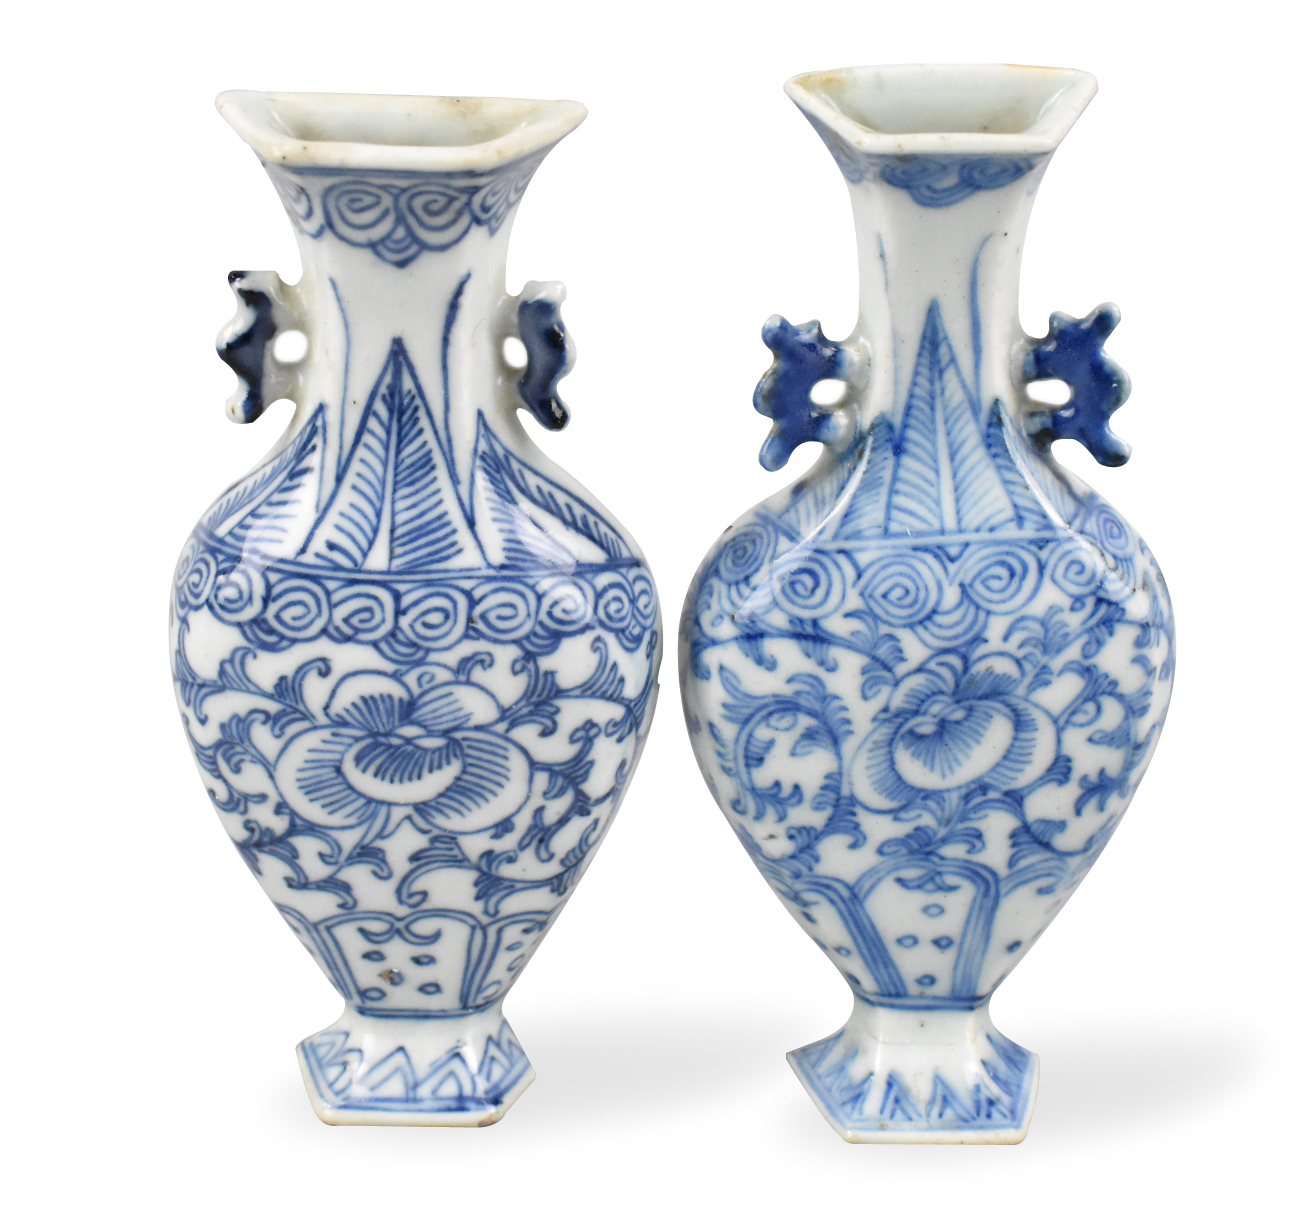 PAIR OF CHINESE BLUE & WHITE WALL